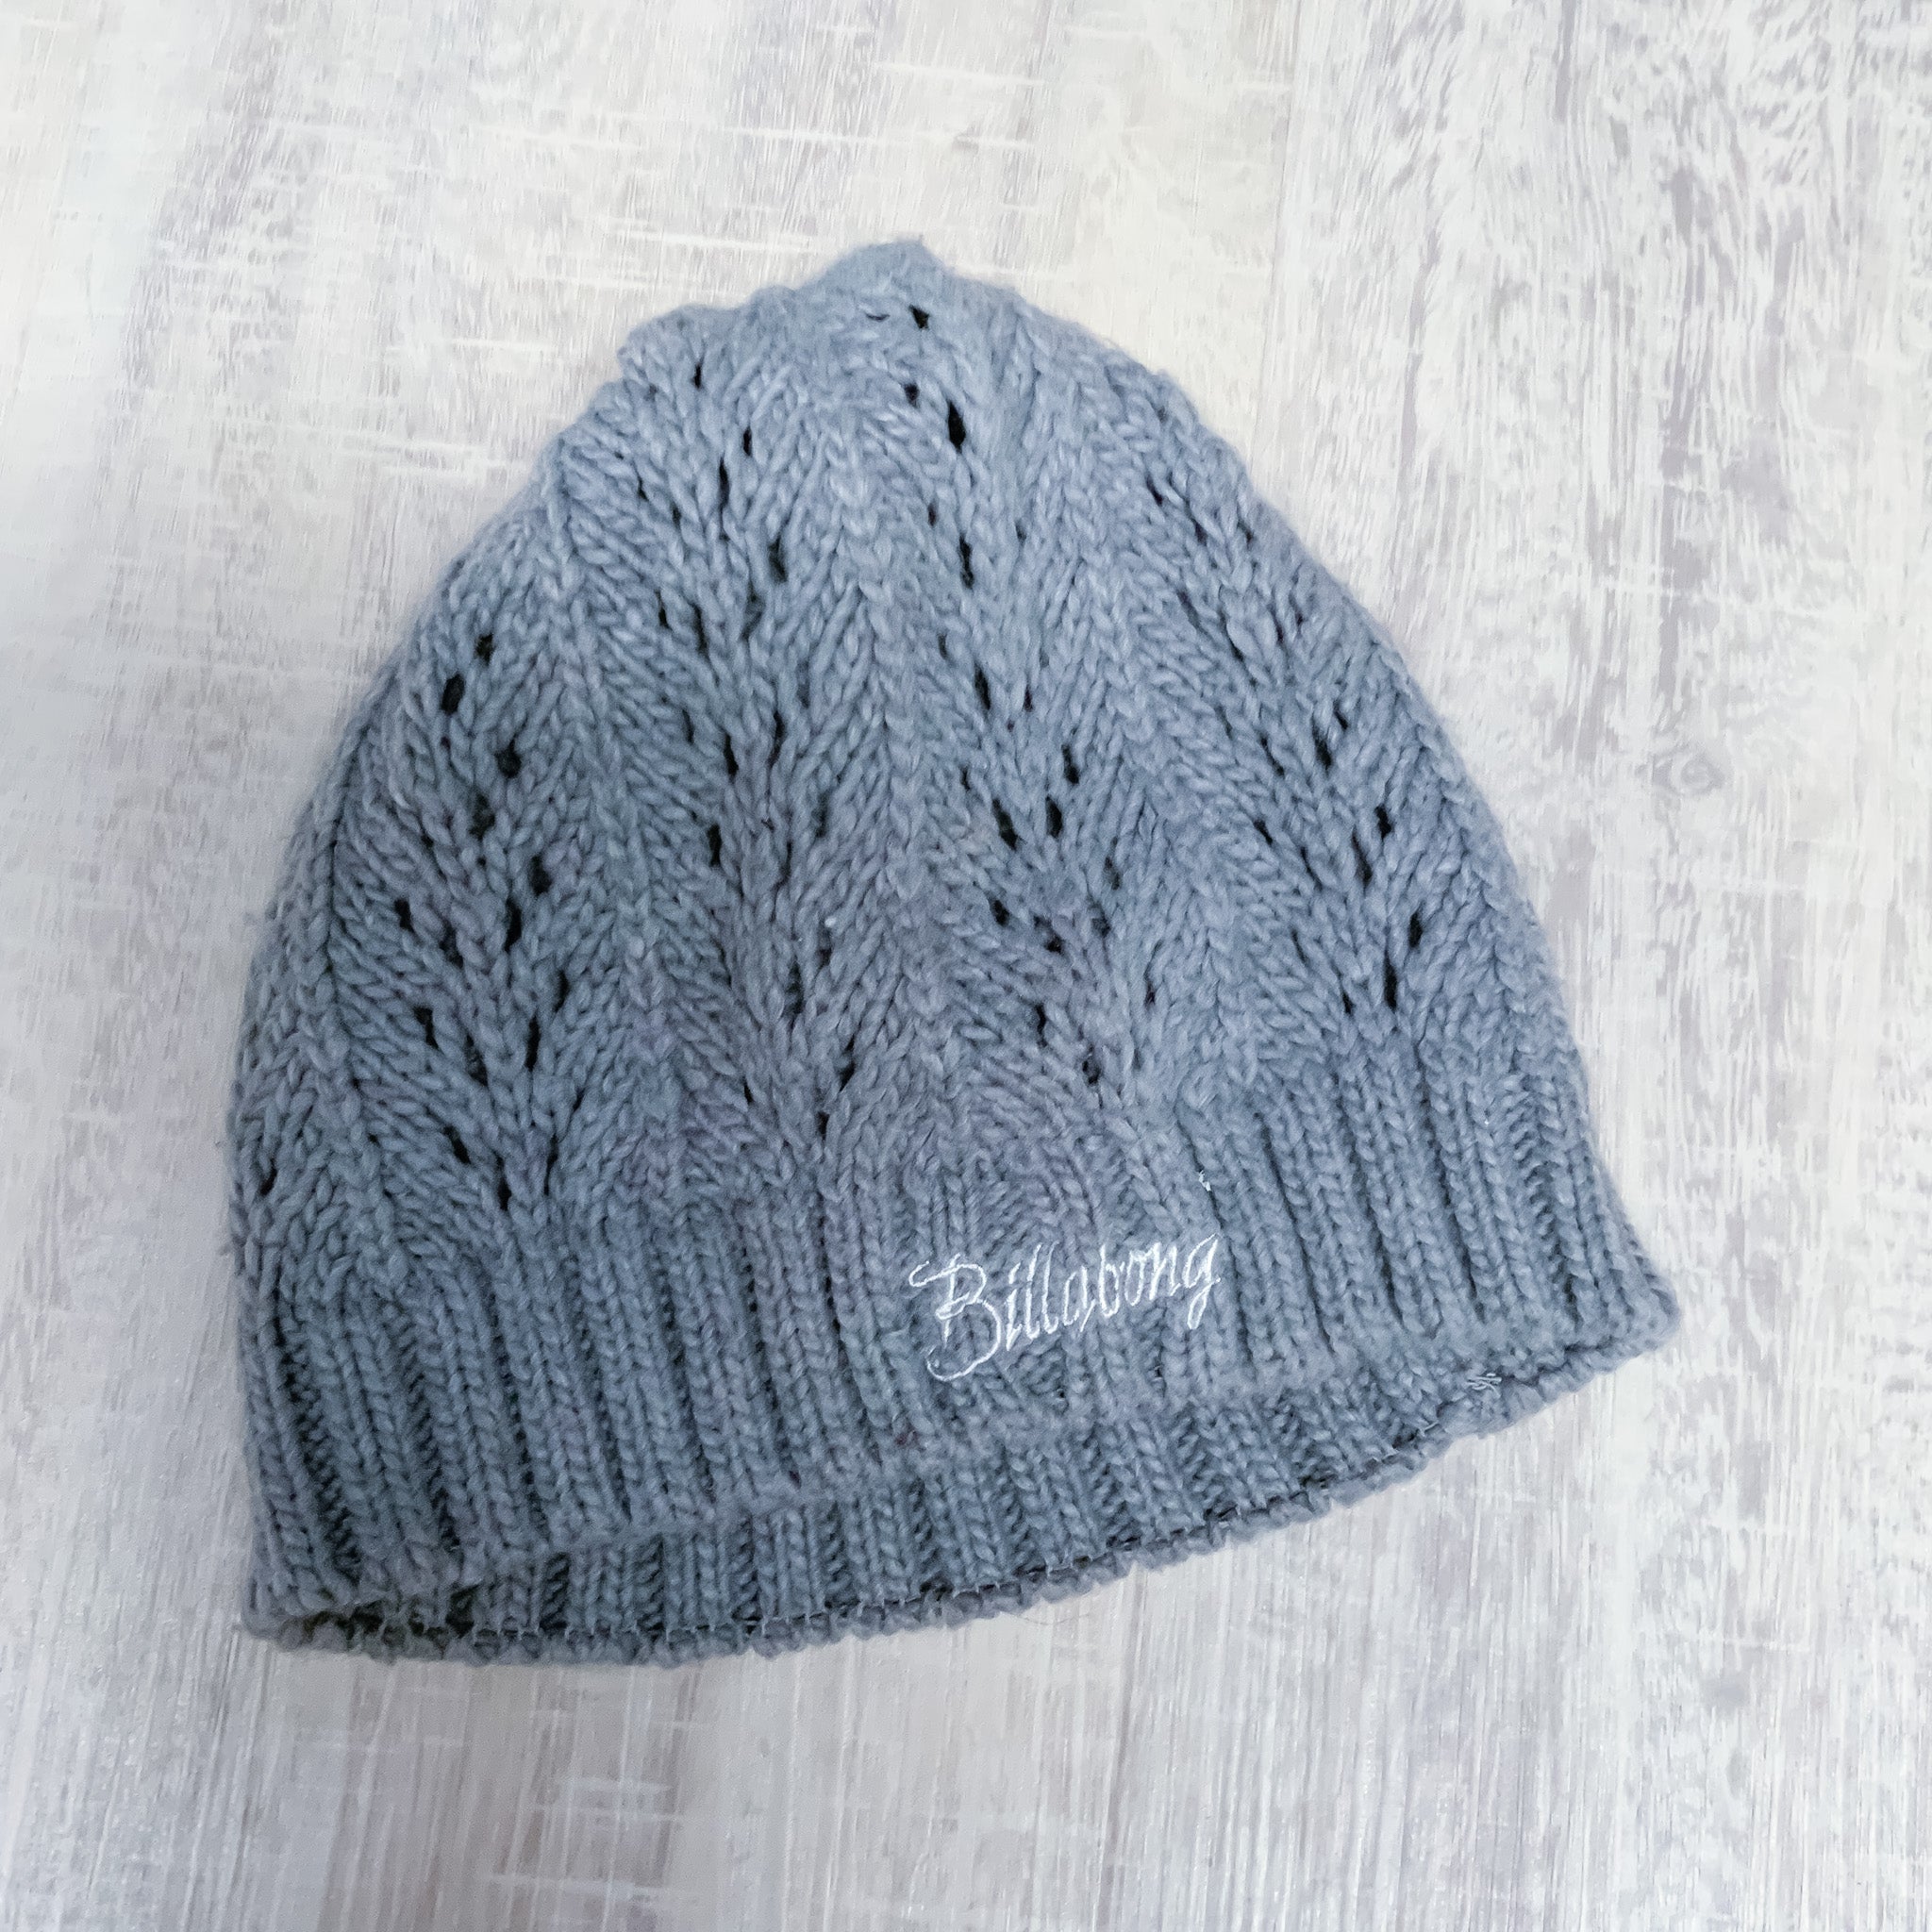 BILLABONG Ladies Grey Knitted Beanie - One Size